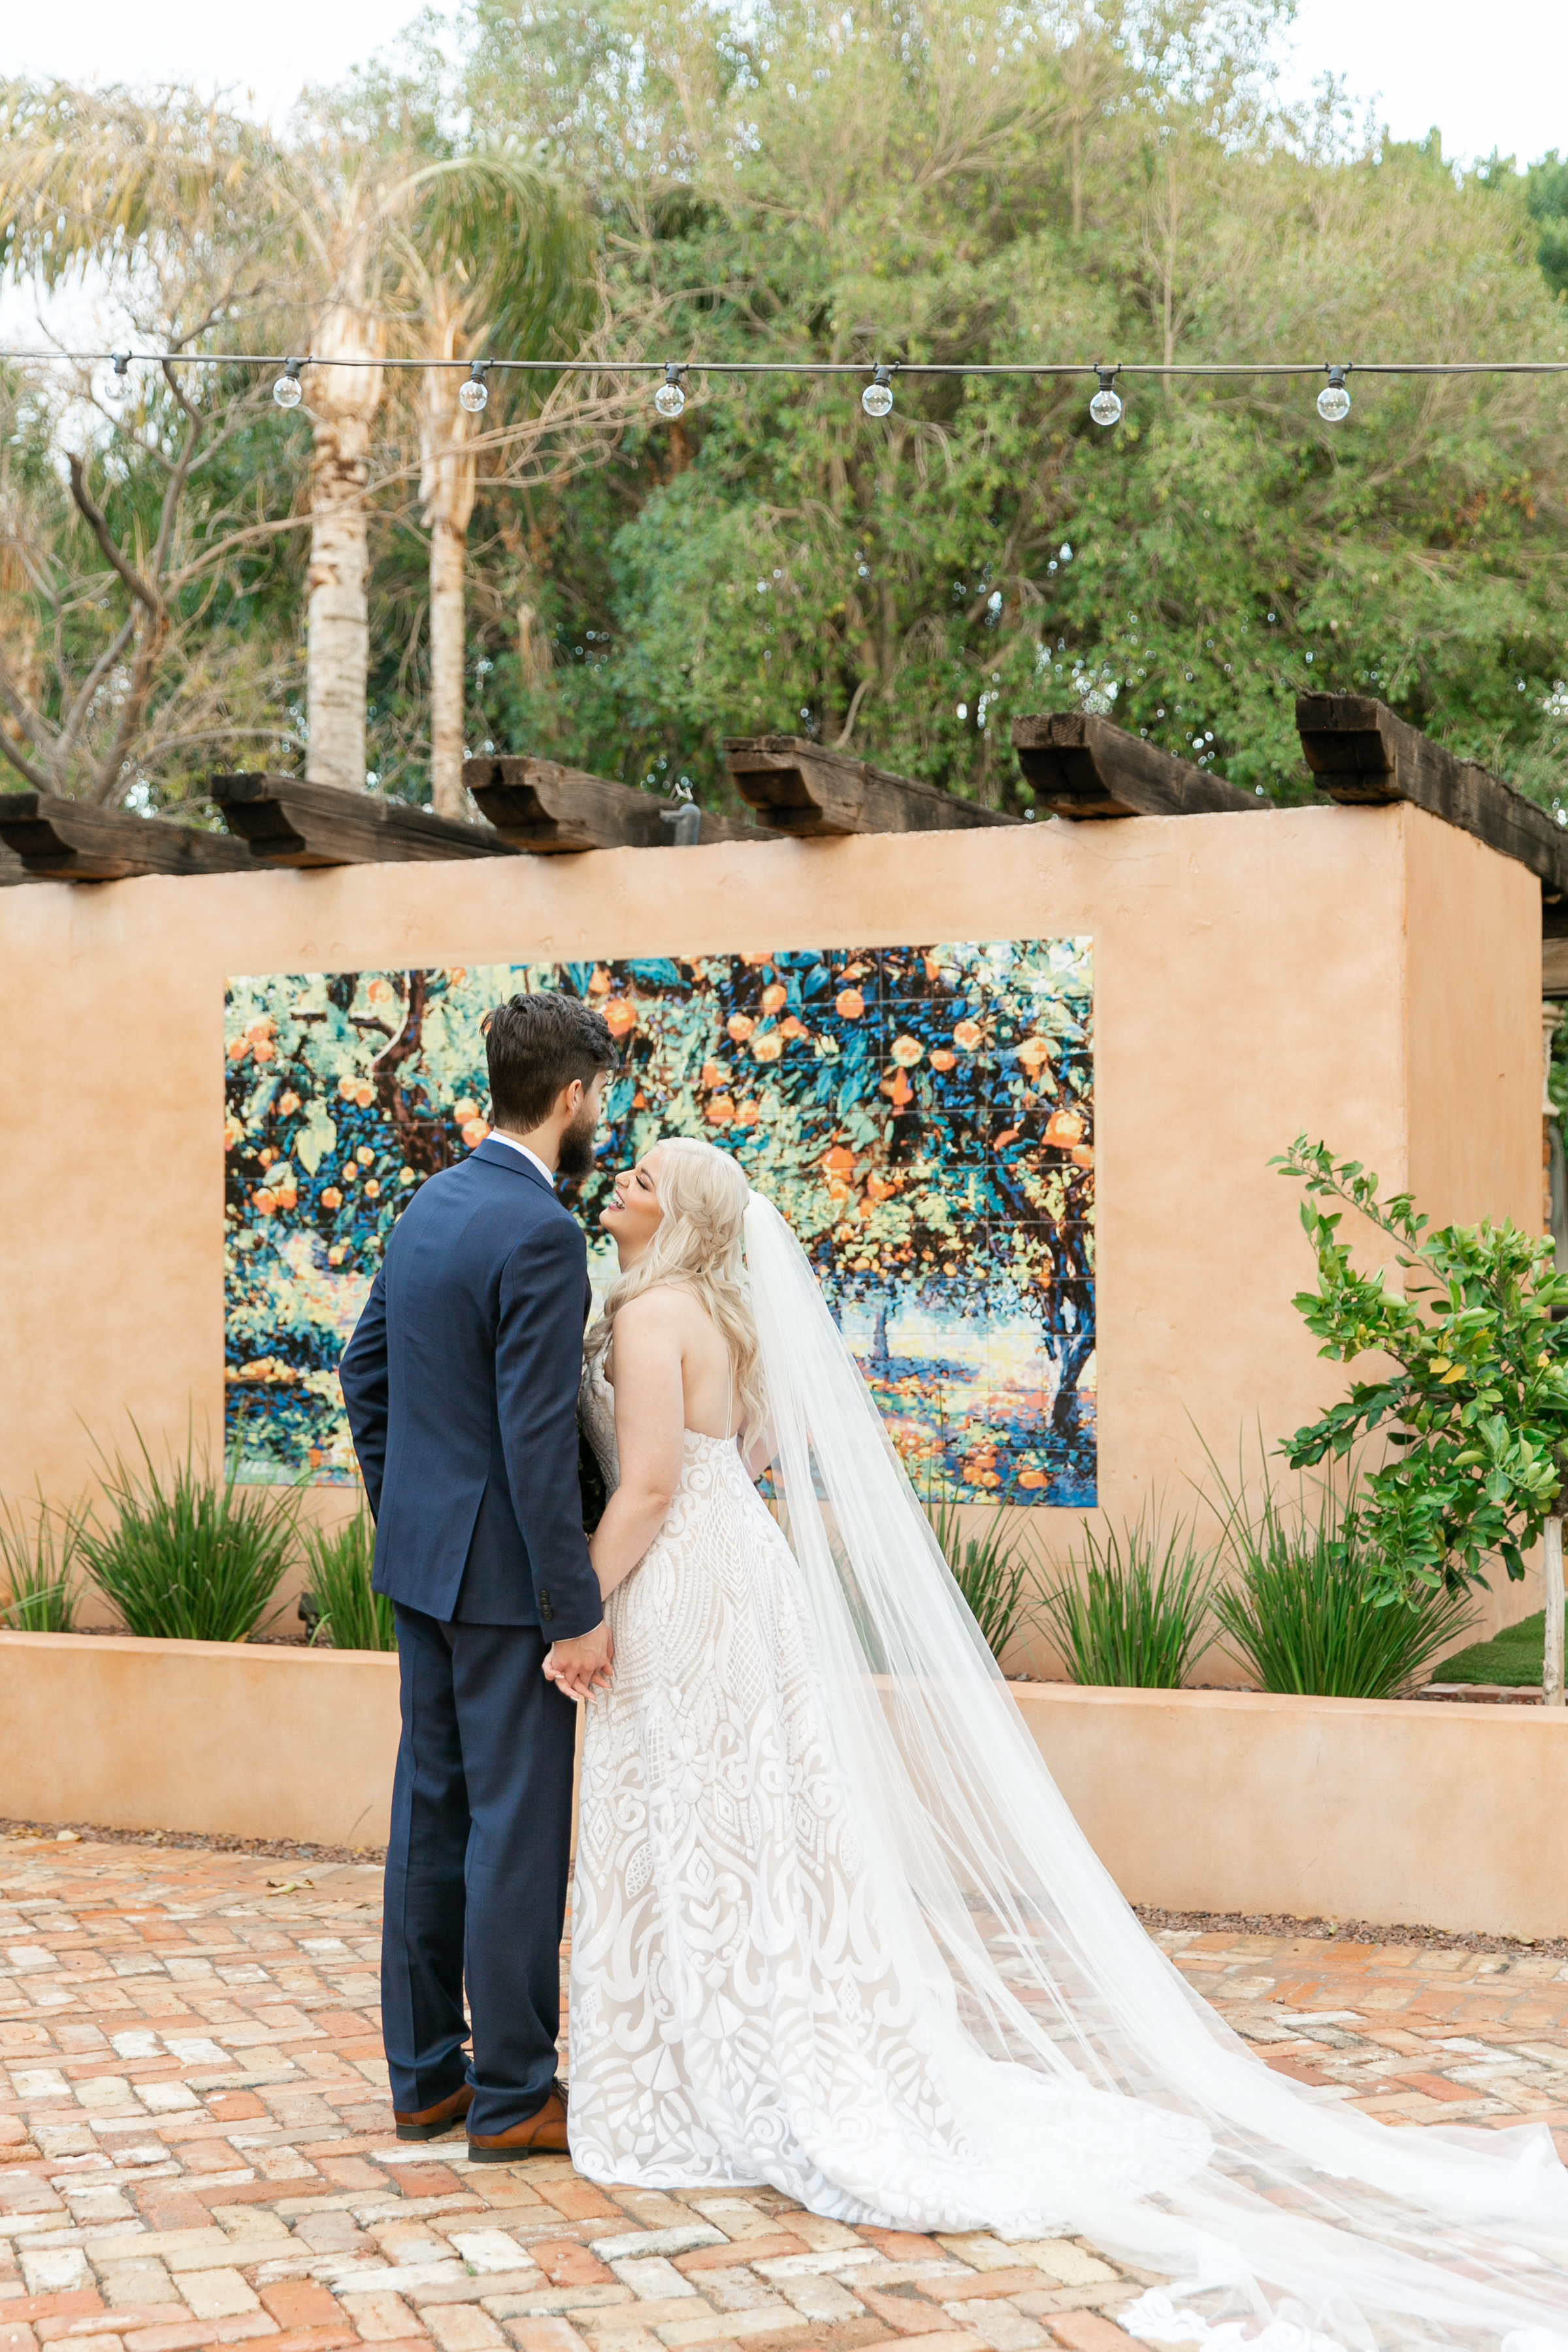 Karlie Colleen Photography - The Royal Palms Wedding - Some Like It Classic - Alex & Sam-531